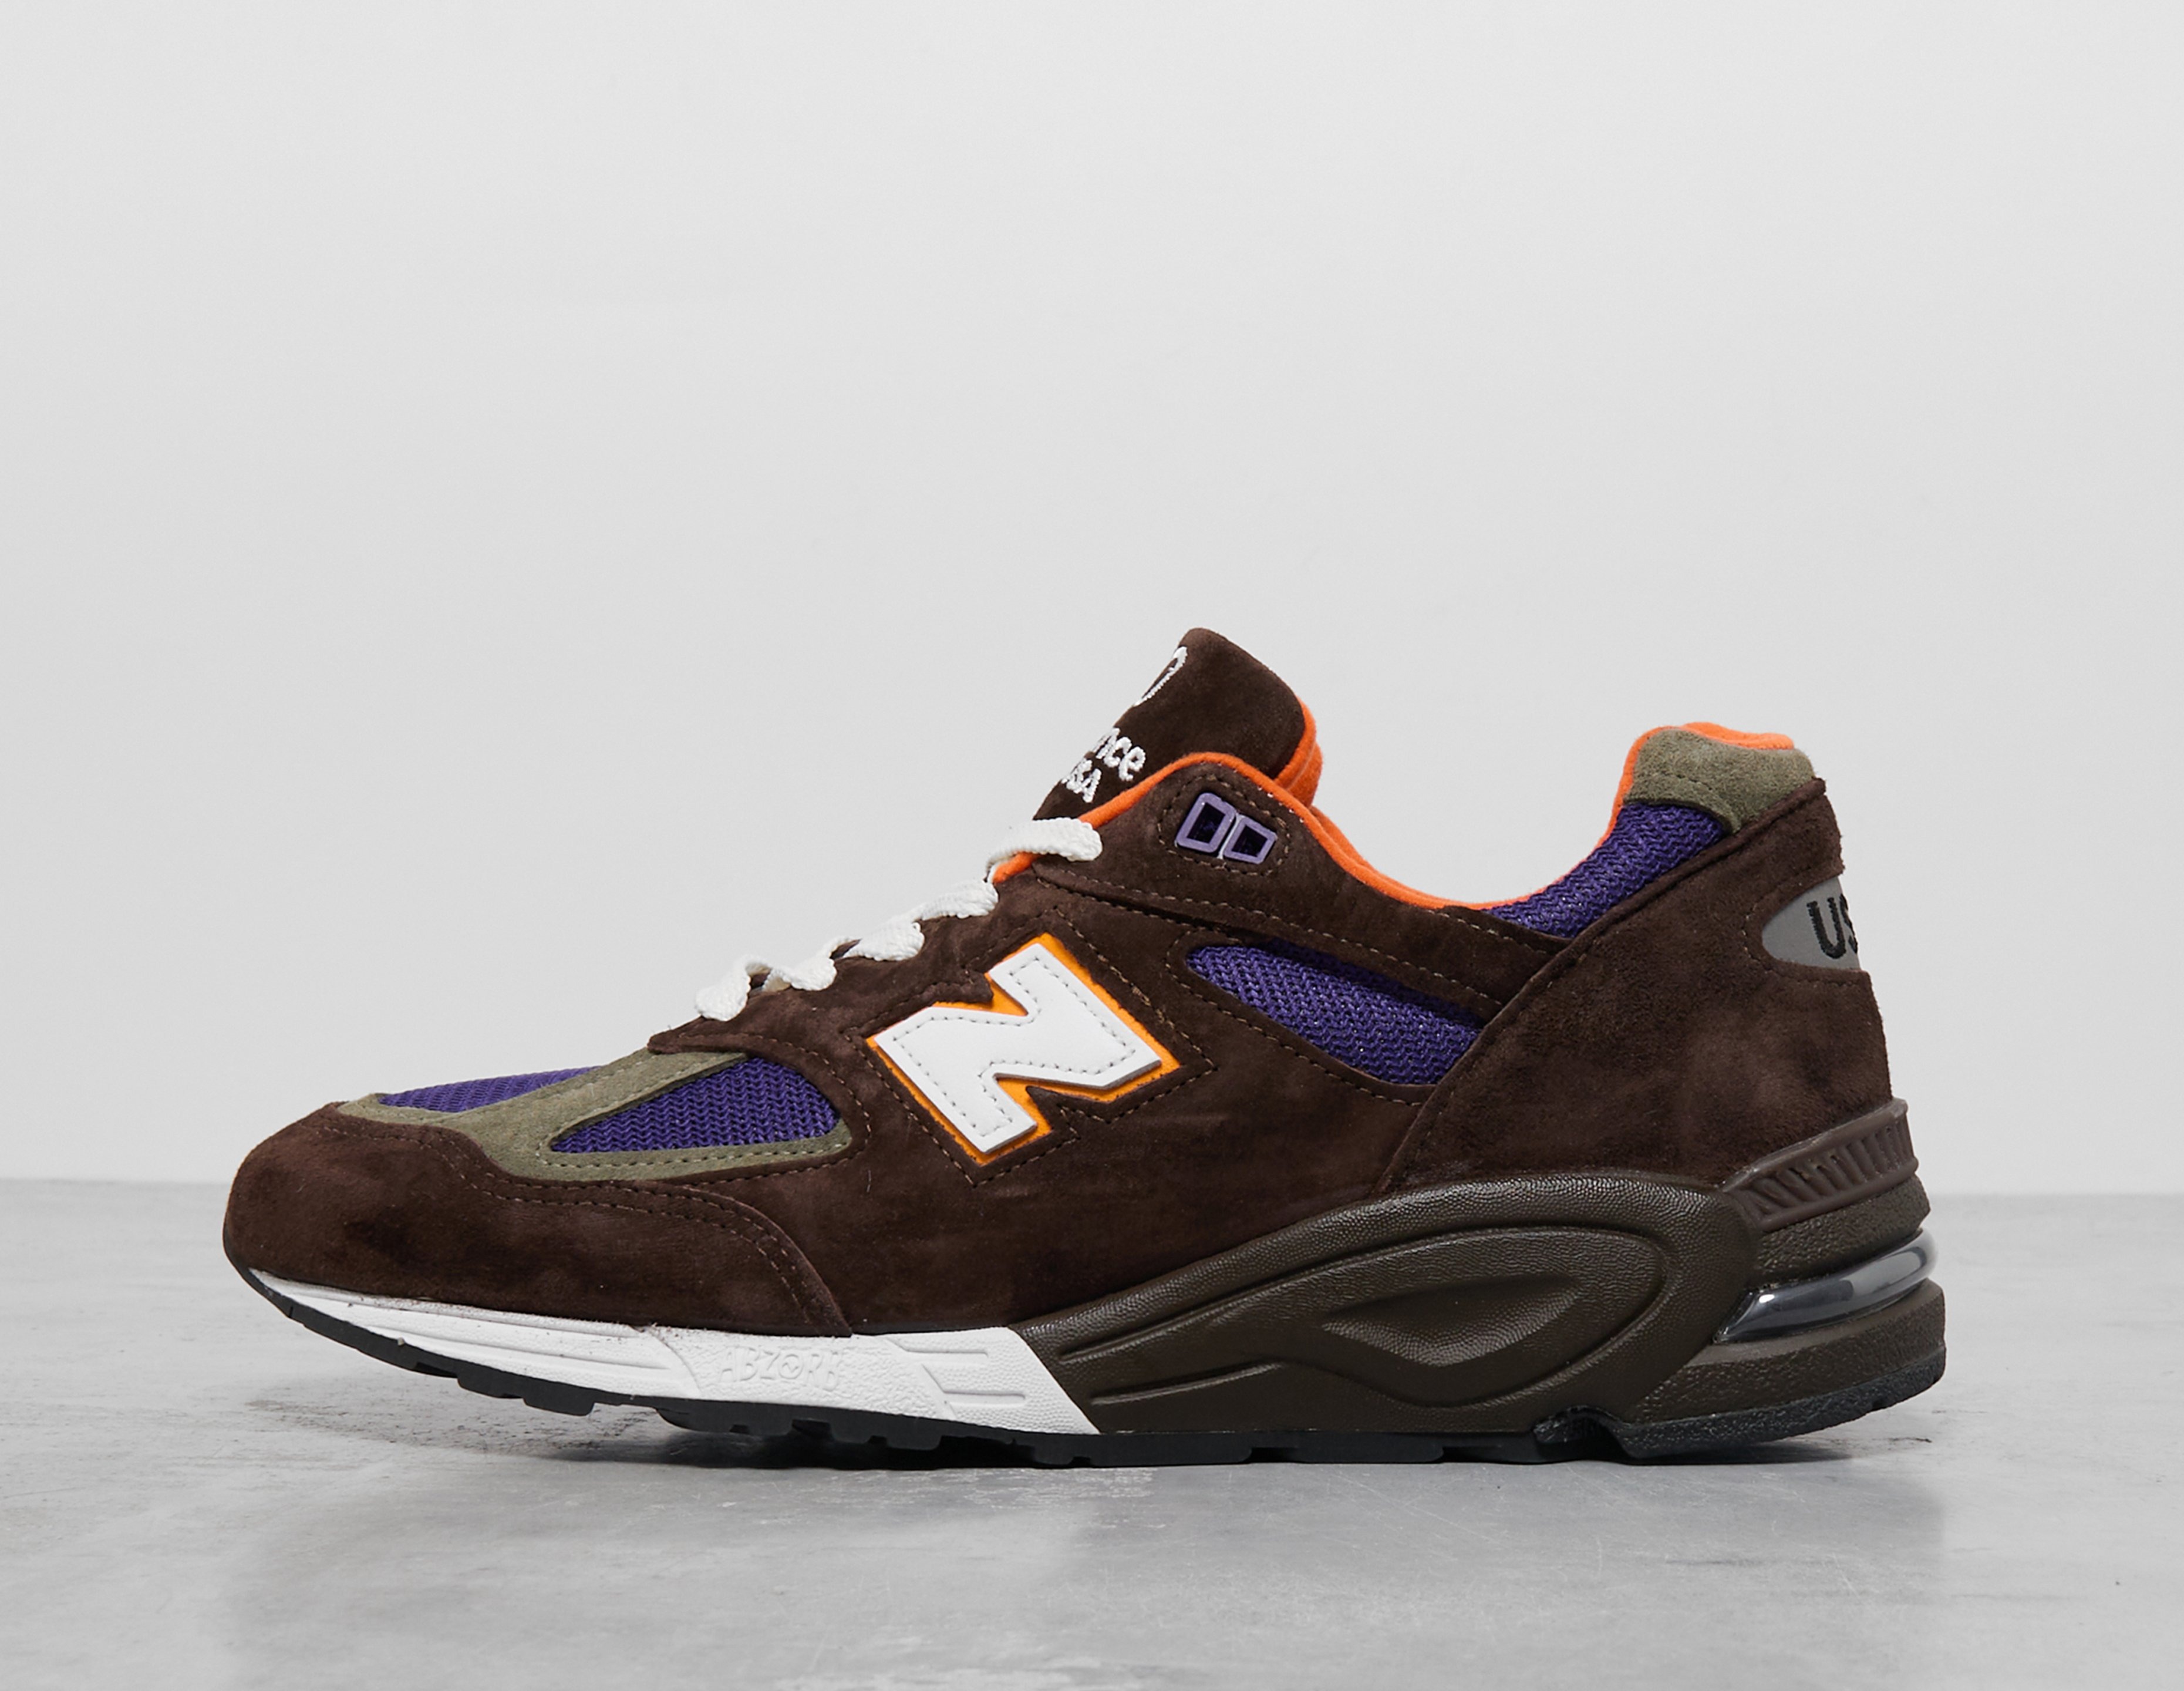 Brown New Balance 990v2 Made in USA Women's